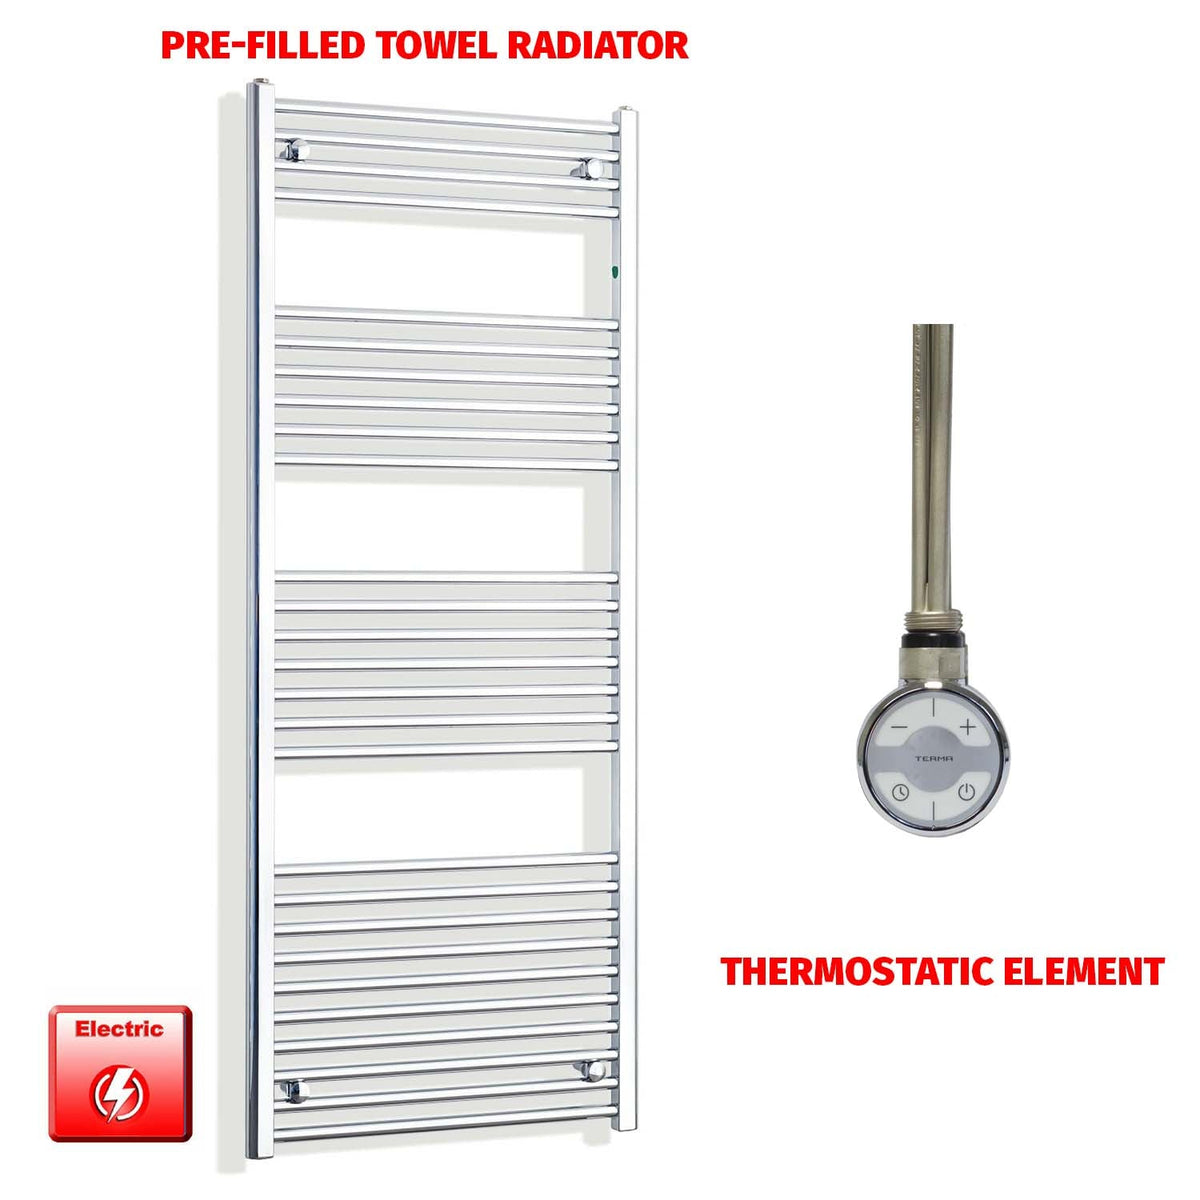 1600mm High 550mm Wide Electric Heated Towel Radiator Straight Chrome MOA Thermostatic element no timer